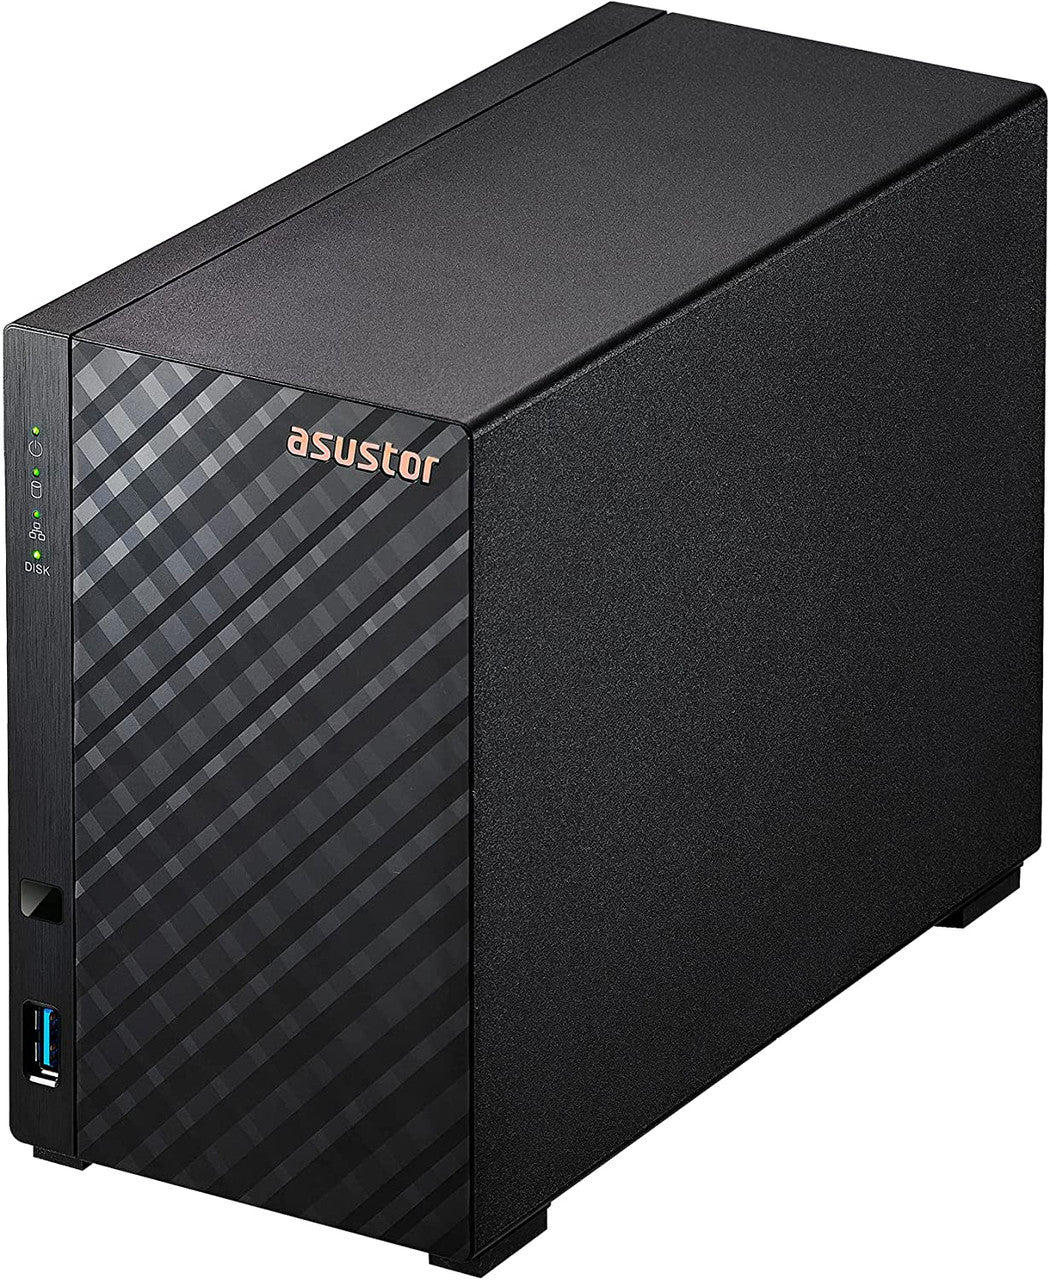 Asustor AS1102T 2-Bay Drivestor 2 NAS with 1GB RAM and 24TB (2x12TB) Western Digital RED PRO Drives